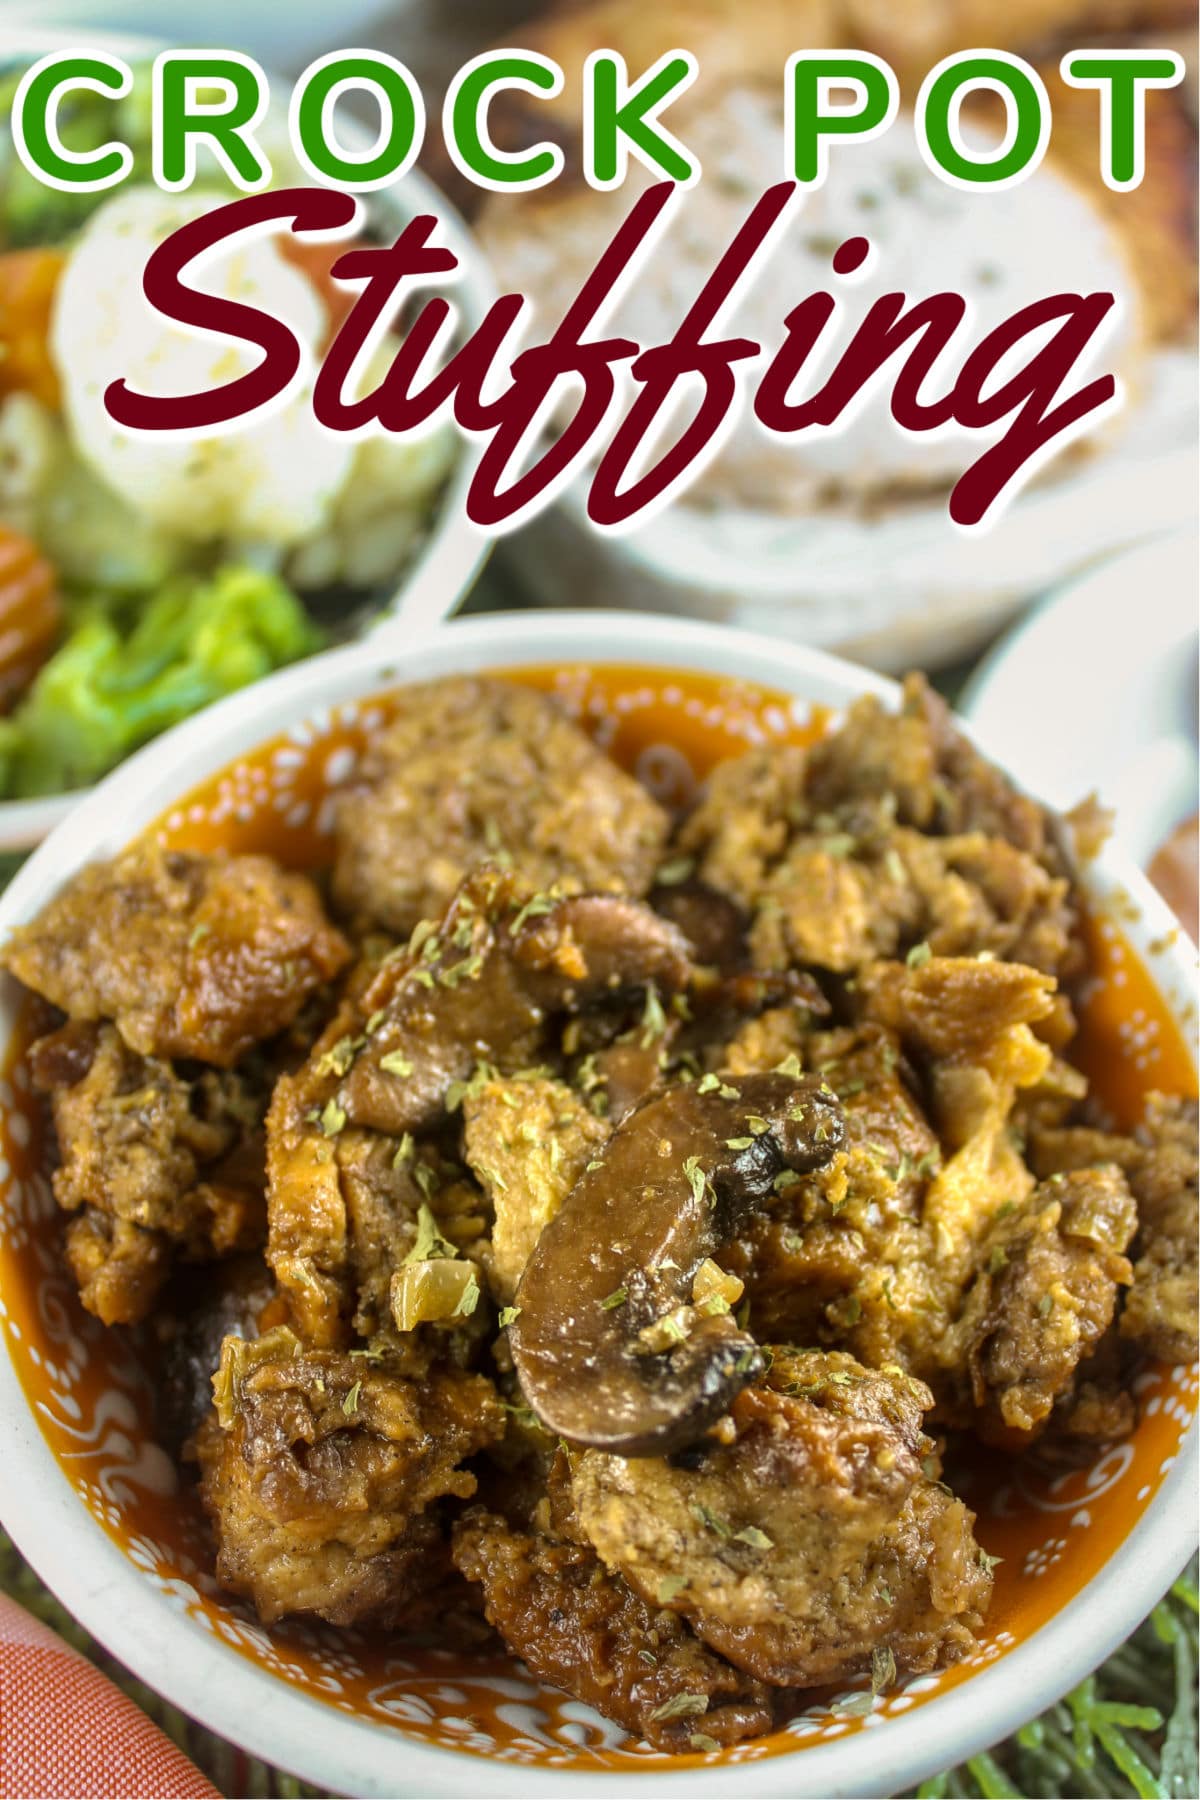 Making stuffing has never been easier! This Crock Pot Stuffing will be the star of your Holiday dinner! Plus - your house will smell amazing!  via @foodhussy